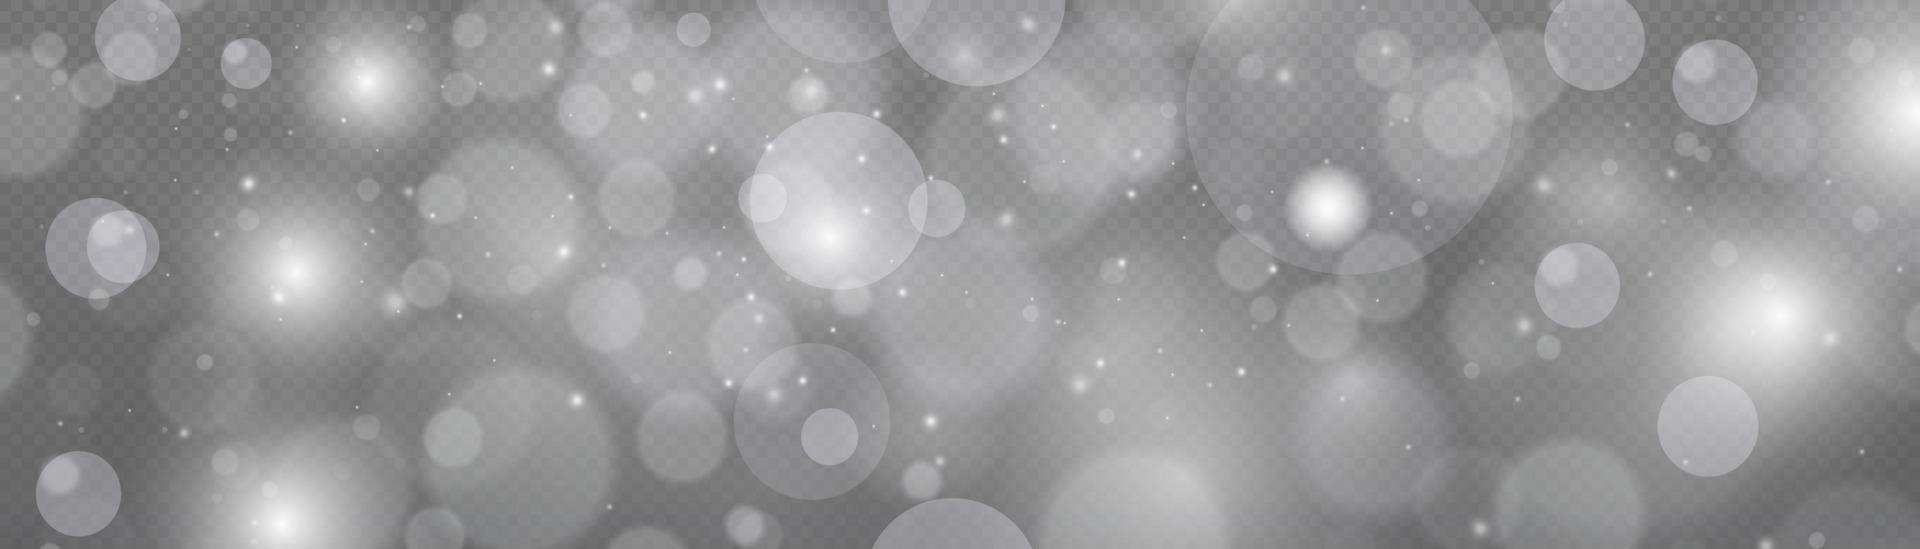 Light abstract glowing bokeh lights. Light bokeh effect isolated. Christmas background from shining dust. Christmas concept flare sparkle vector